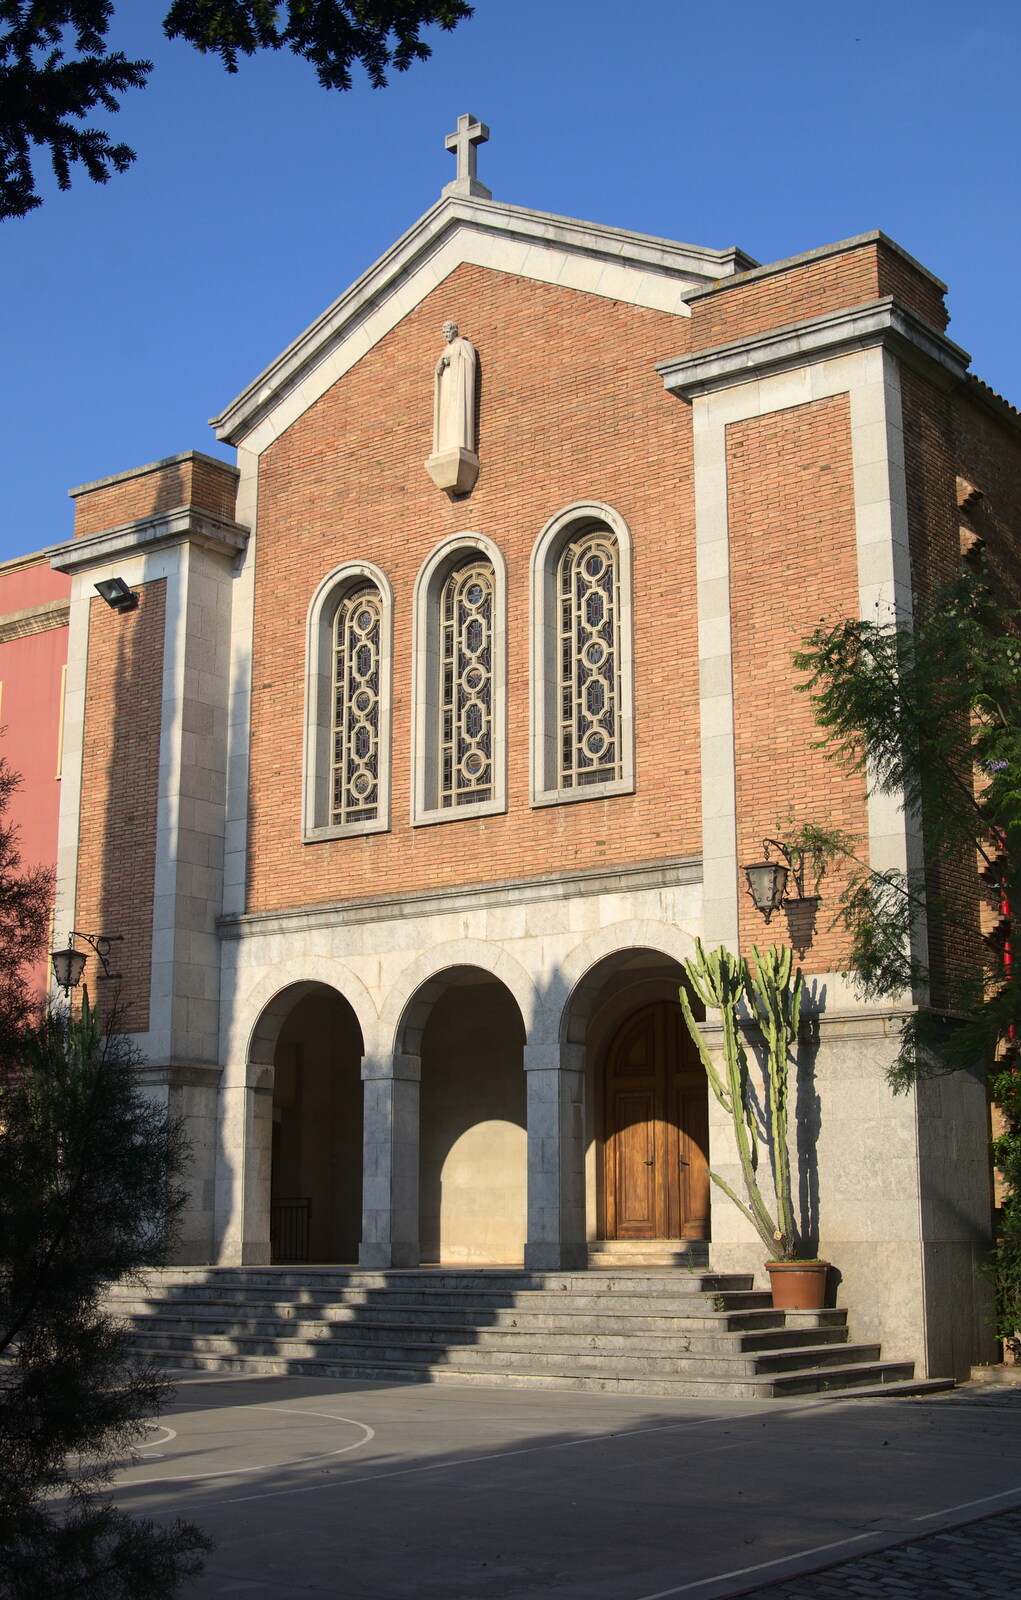 The nearby church attached to the 'monastery' from The Open Education Challenge, Barcelona, Catalonia - 13th July 2014